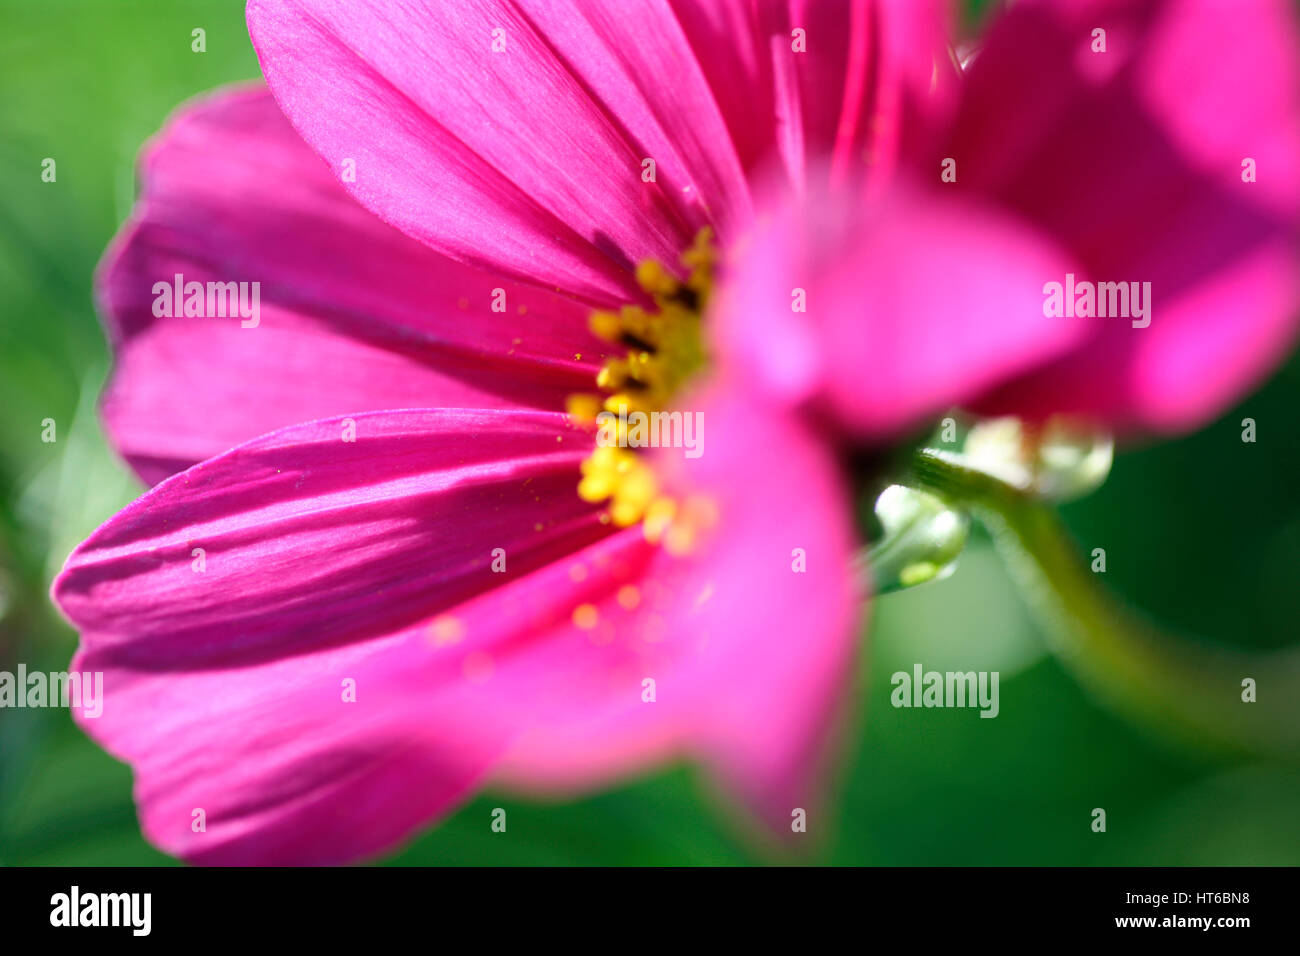 stunning pink cosmos sonata, soft focus and ethereal Jane Ann Butler Photography  JABP1858 Stock Photo